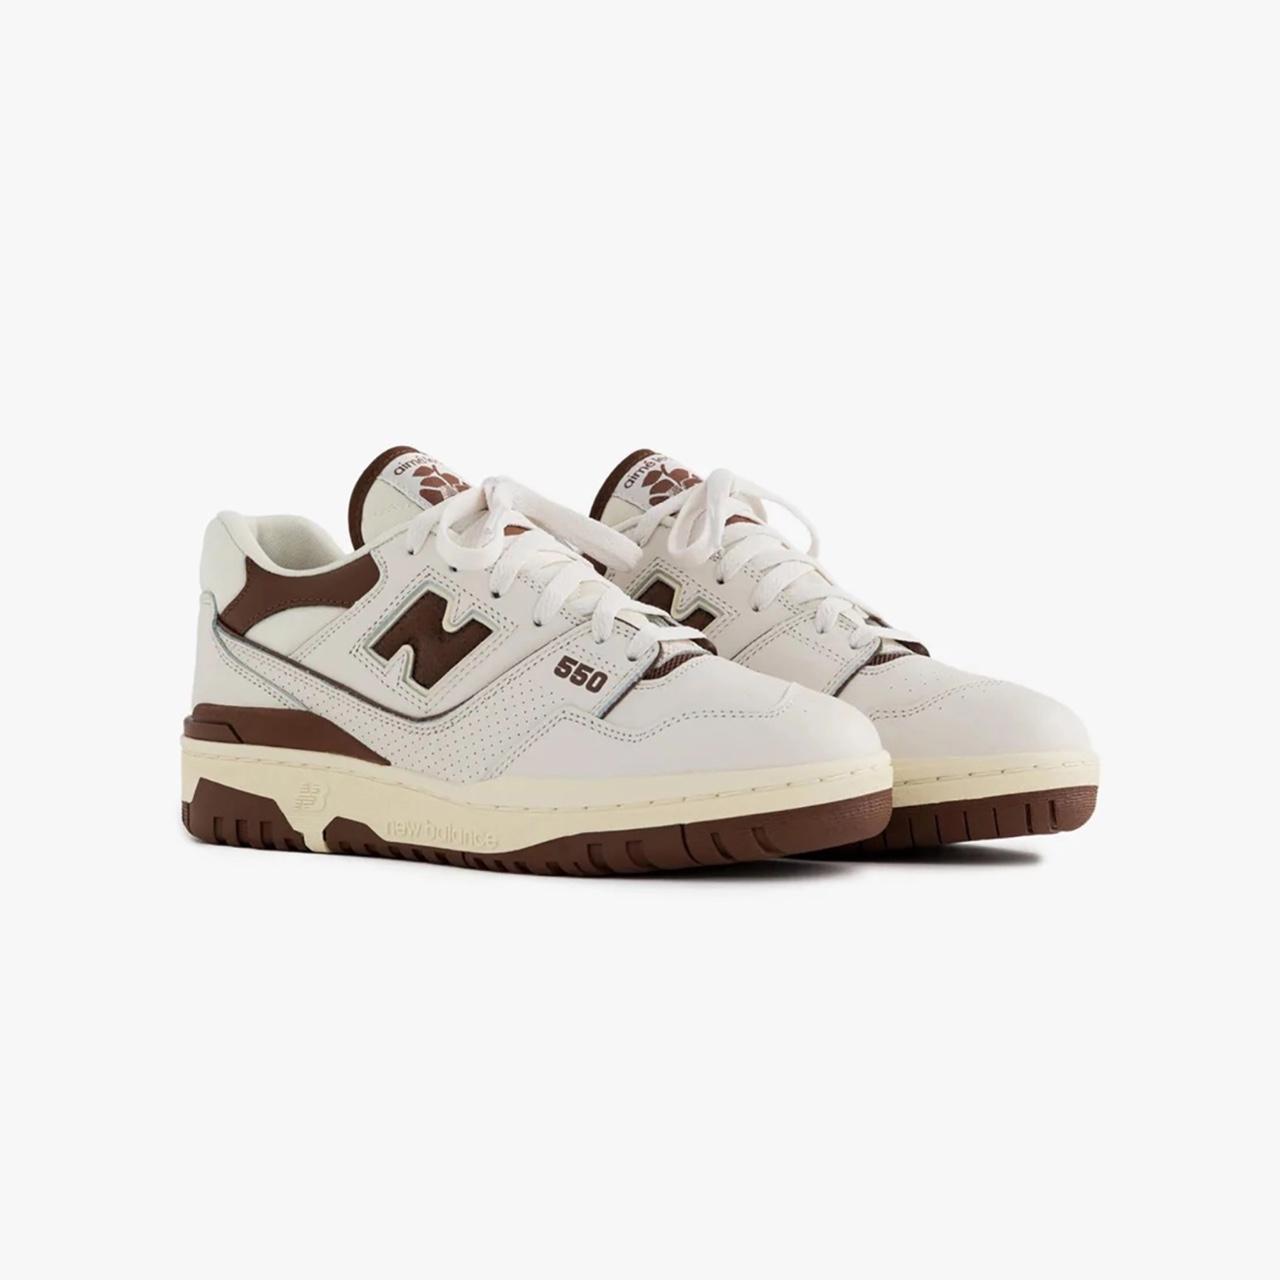 New Balance Women's White and Brown Trainers